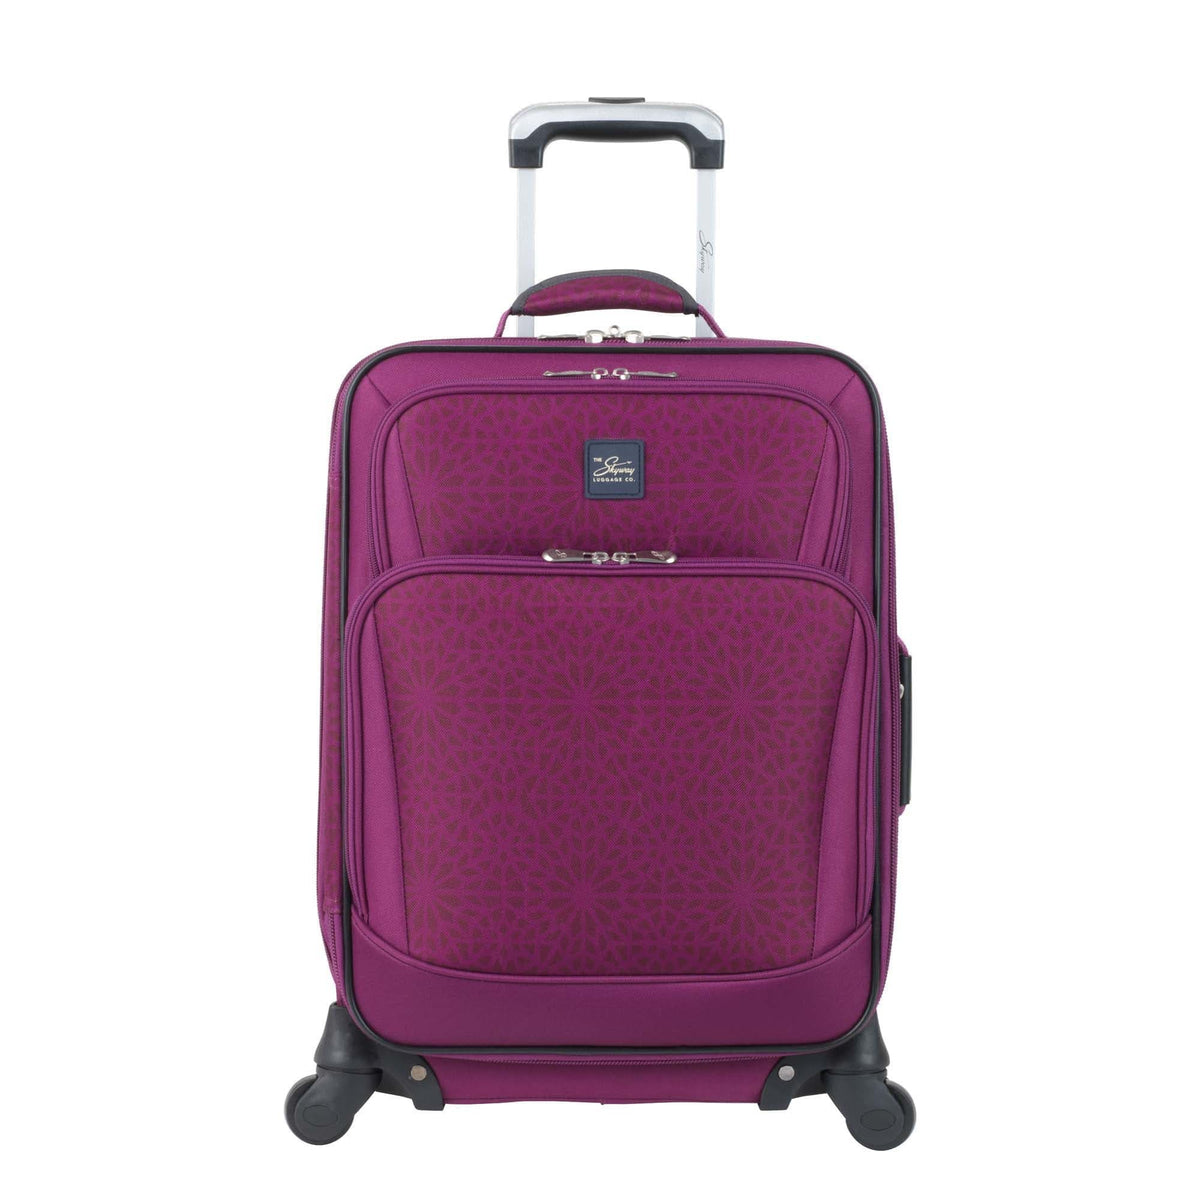 Skyway Epic SoftSide Carry-On Spinner Luggage